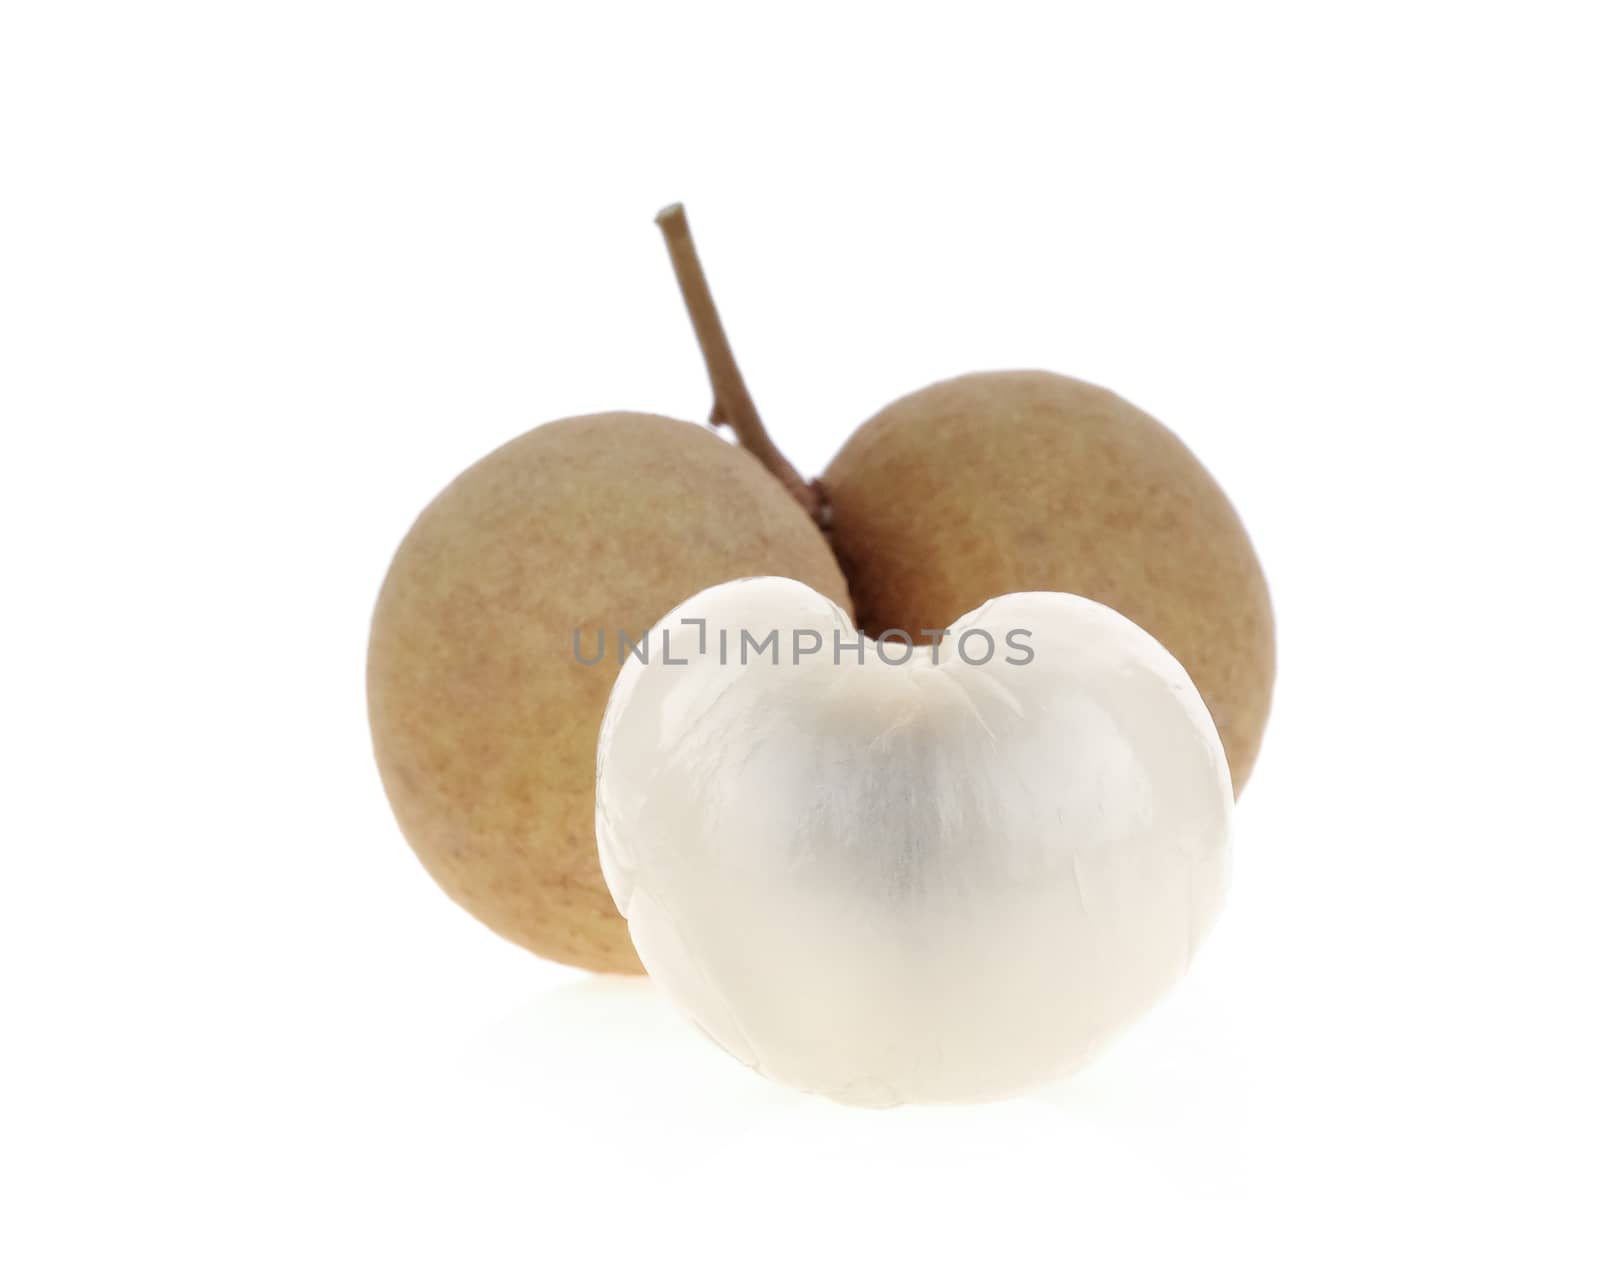 Longan Peel clos-up on white background. by poungsaed